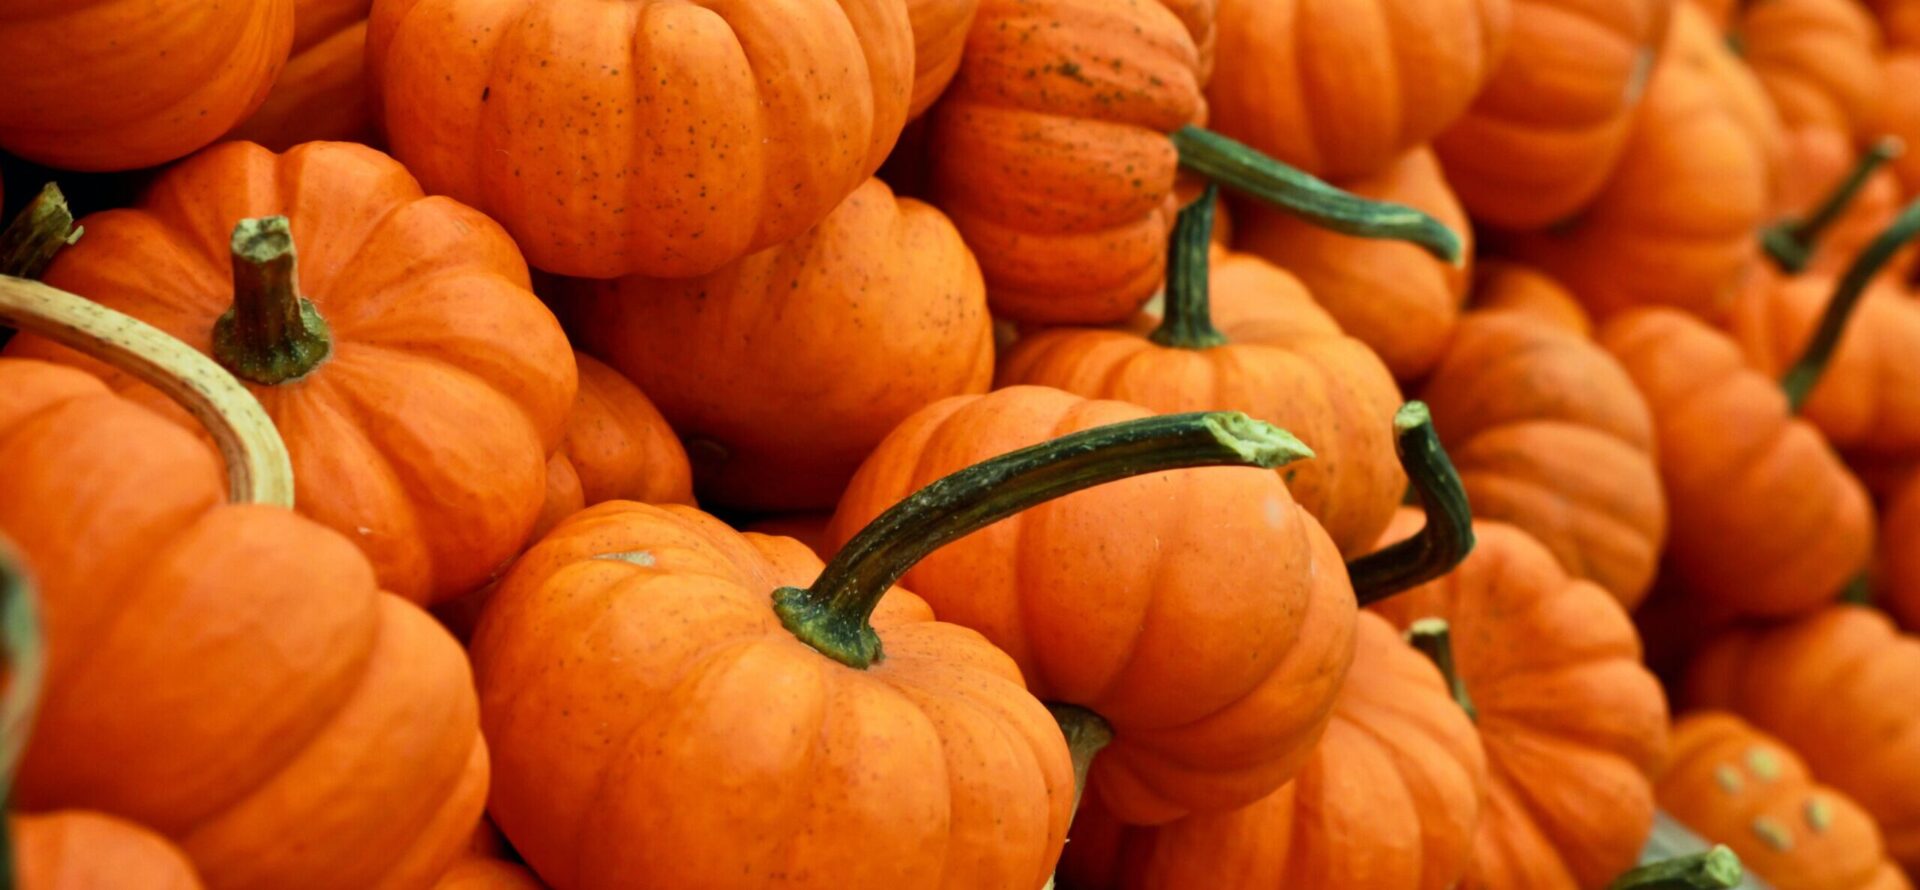 Pumpkins stacked in a pile